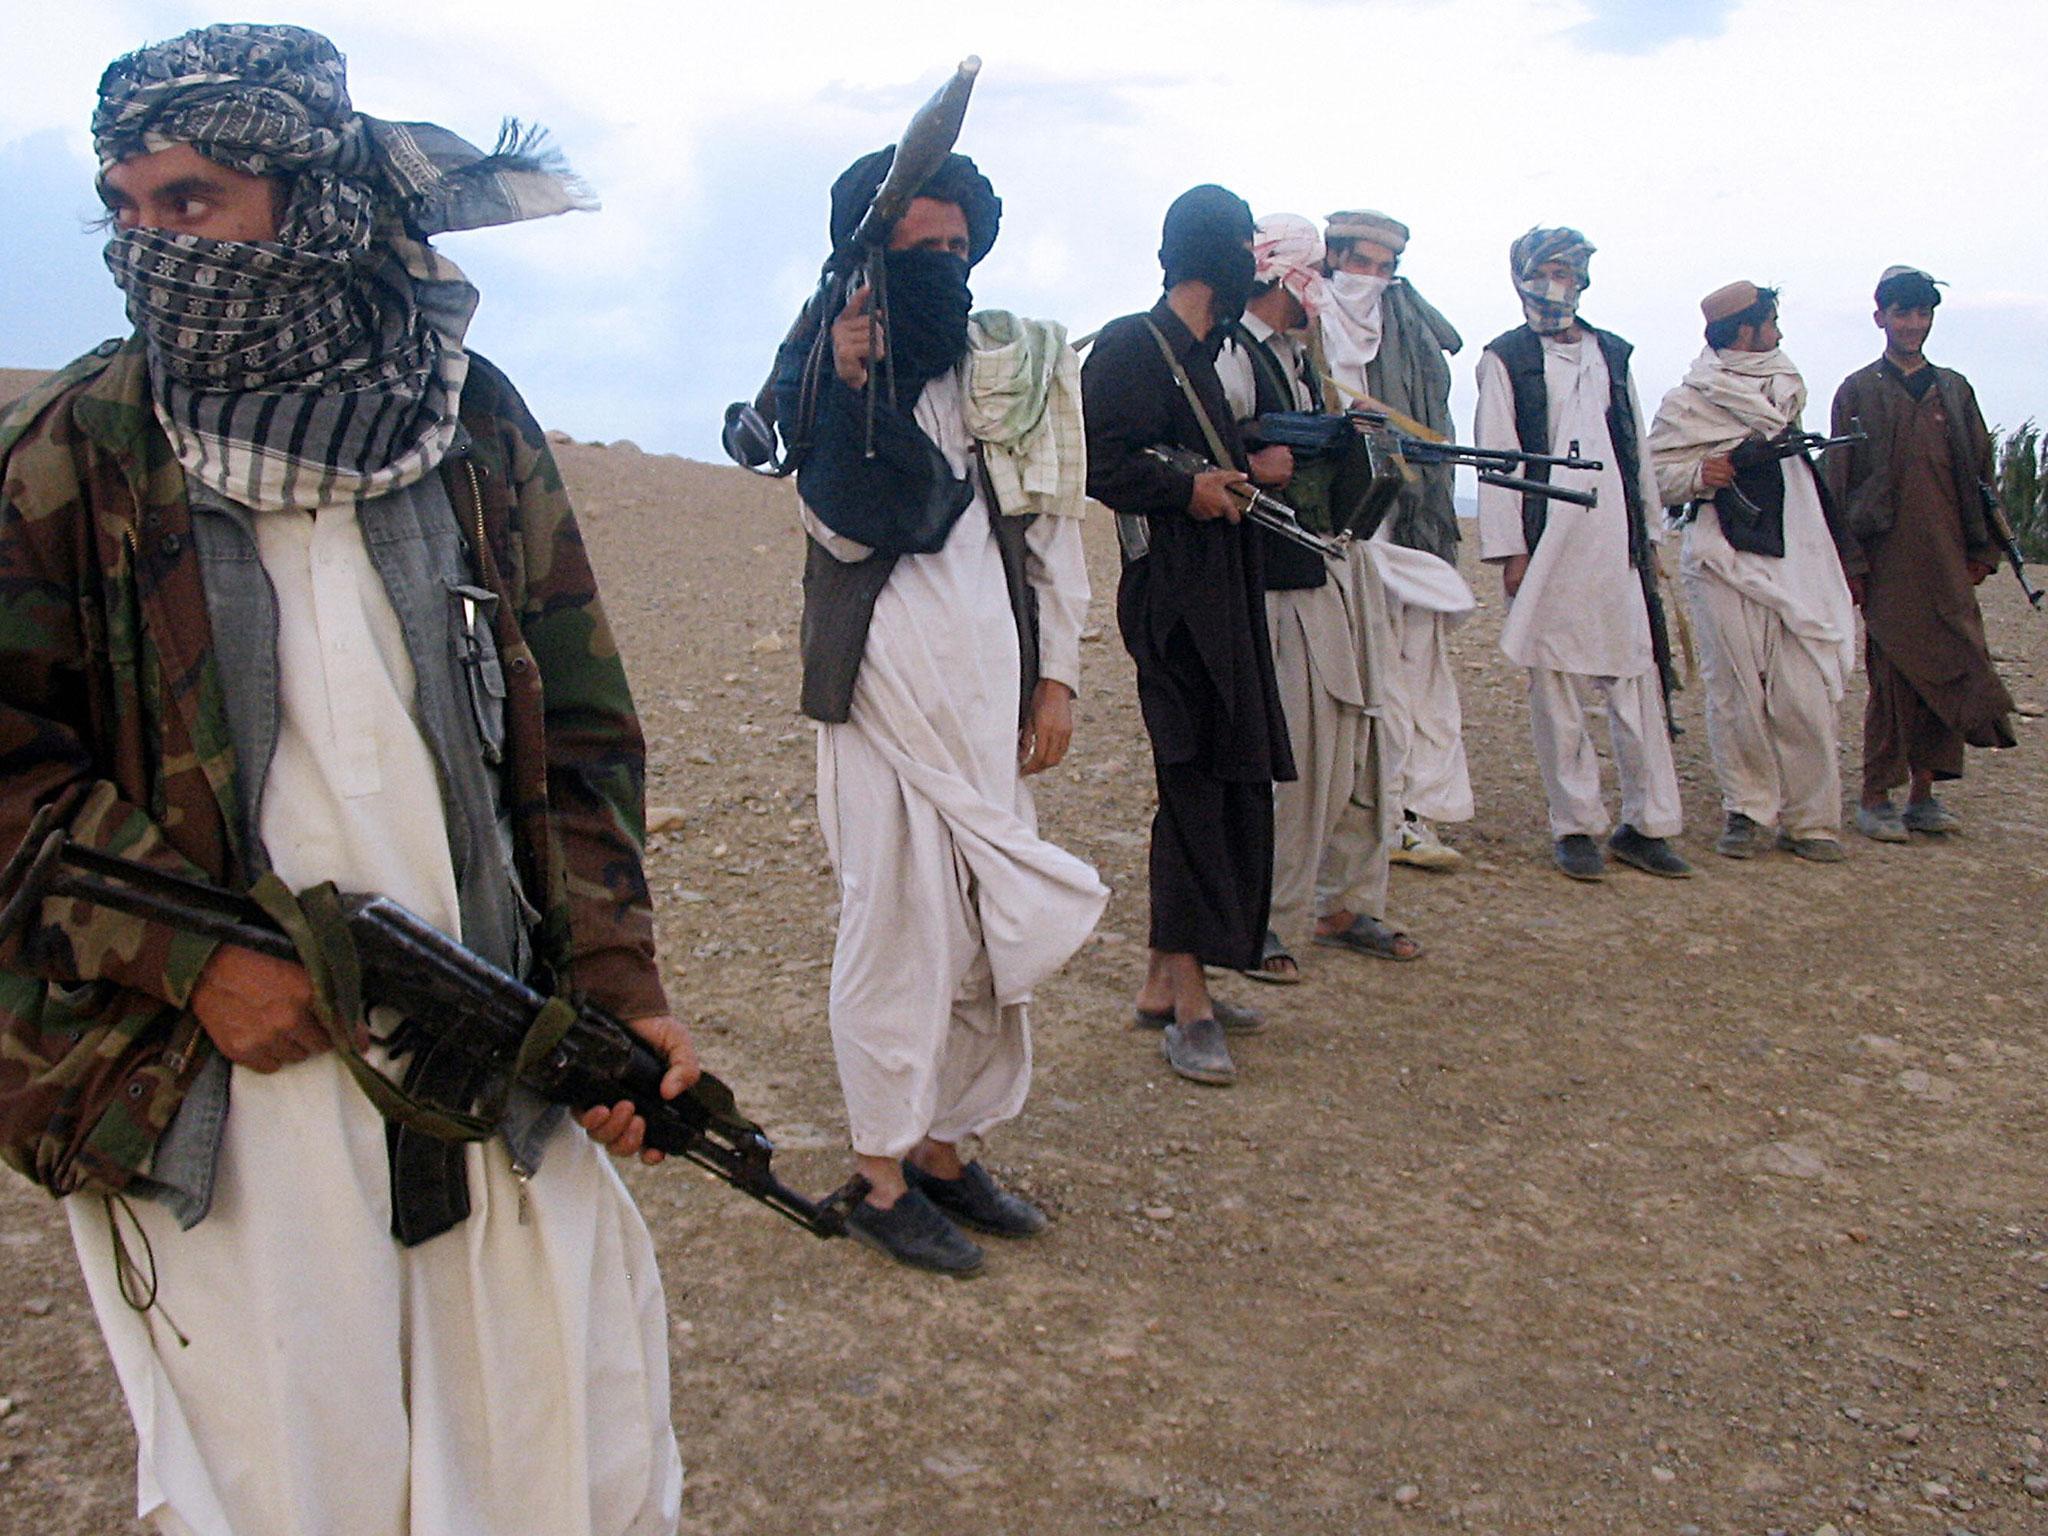 The Taliban still control swathes of Afganistan, 16 years after the invasion